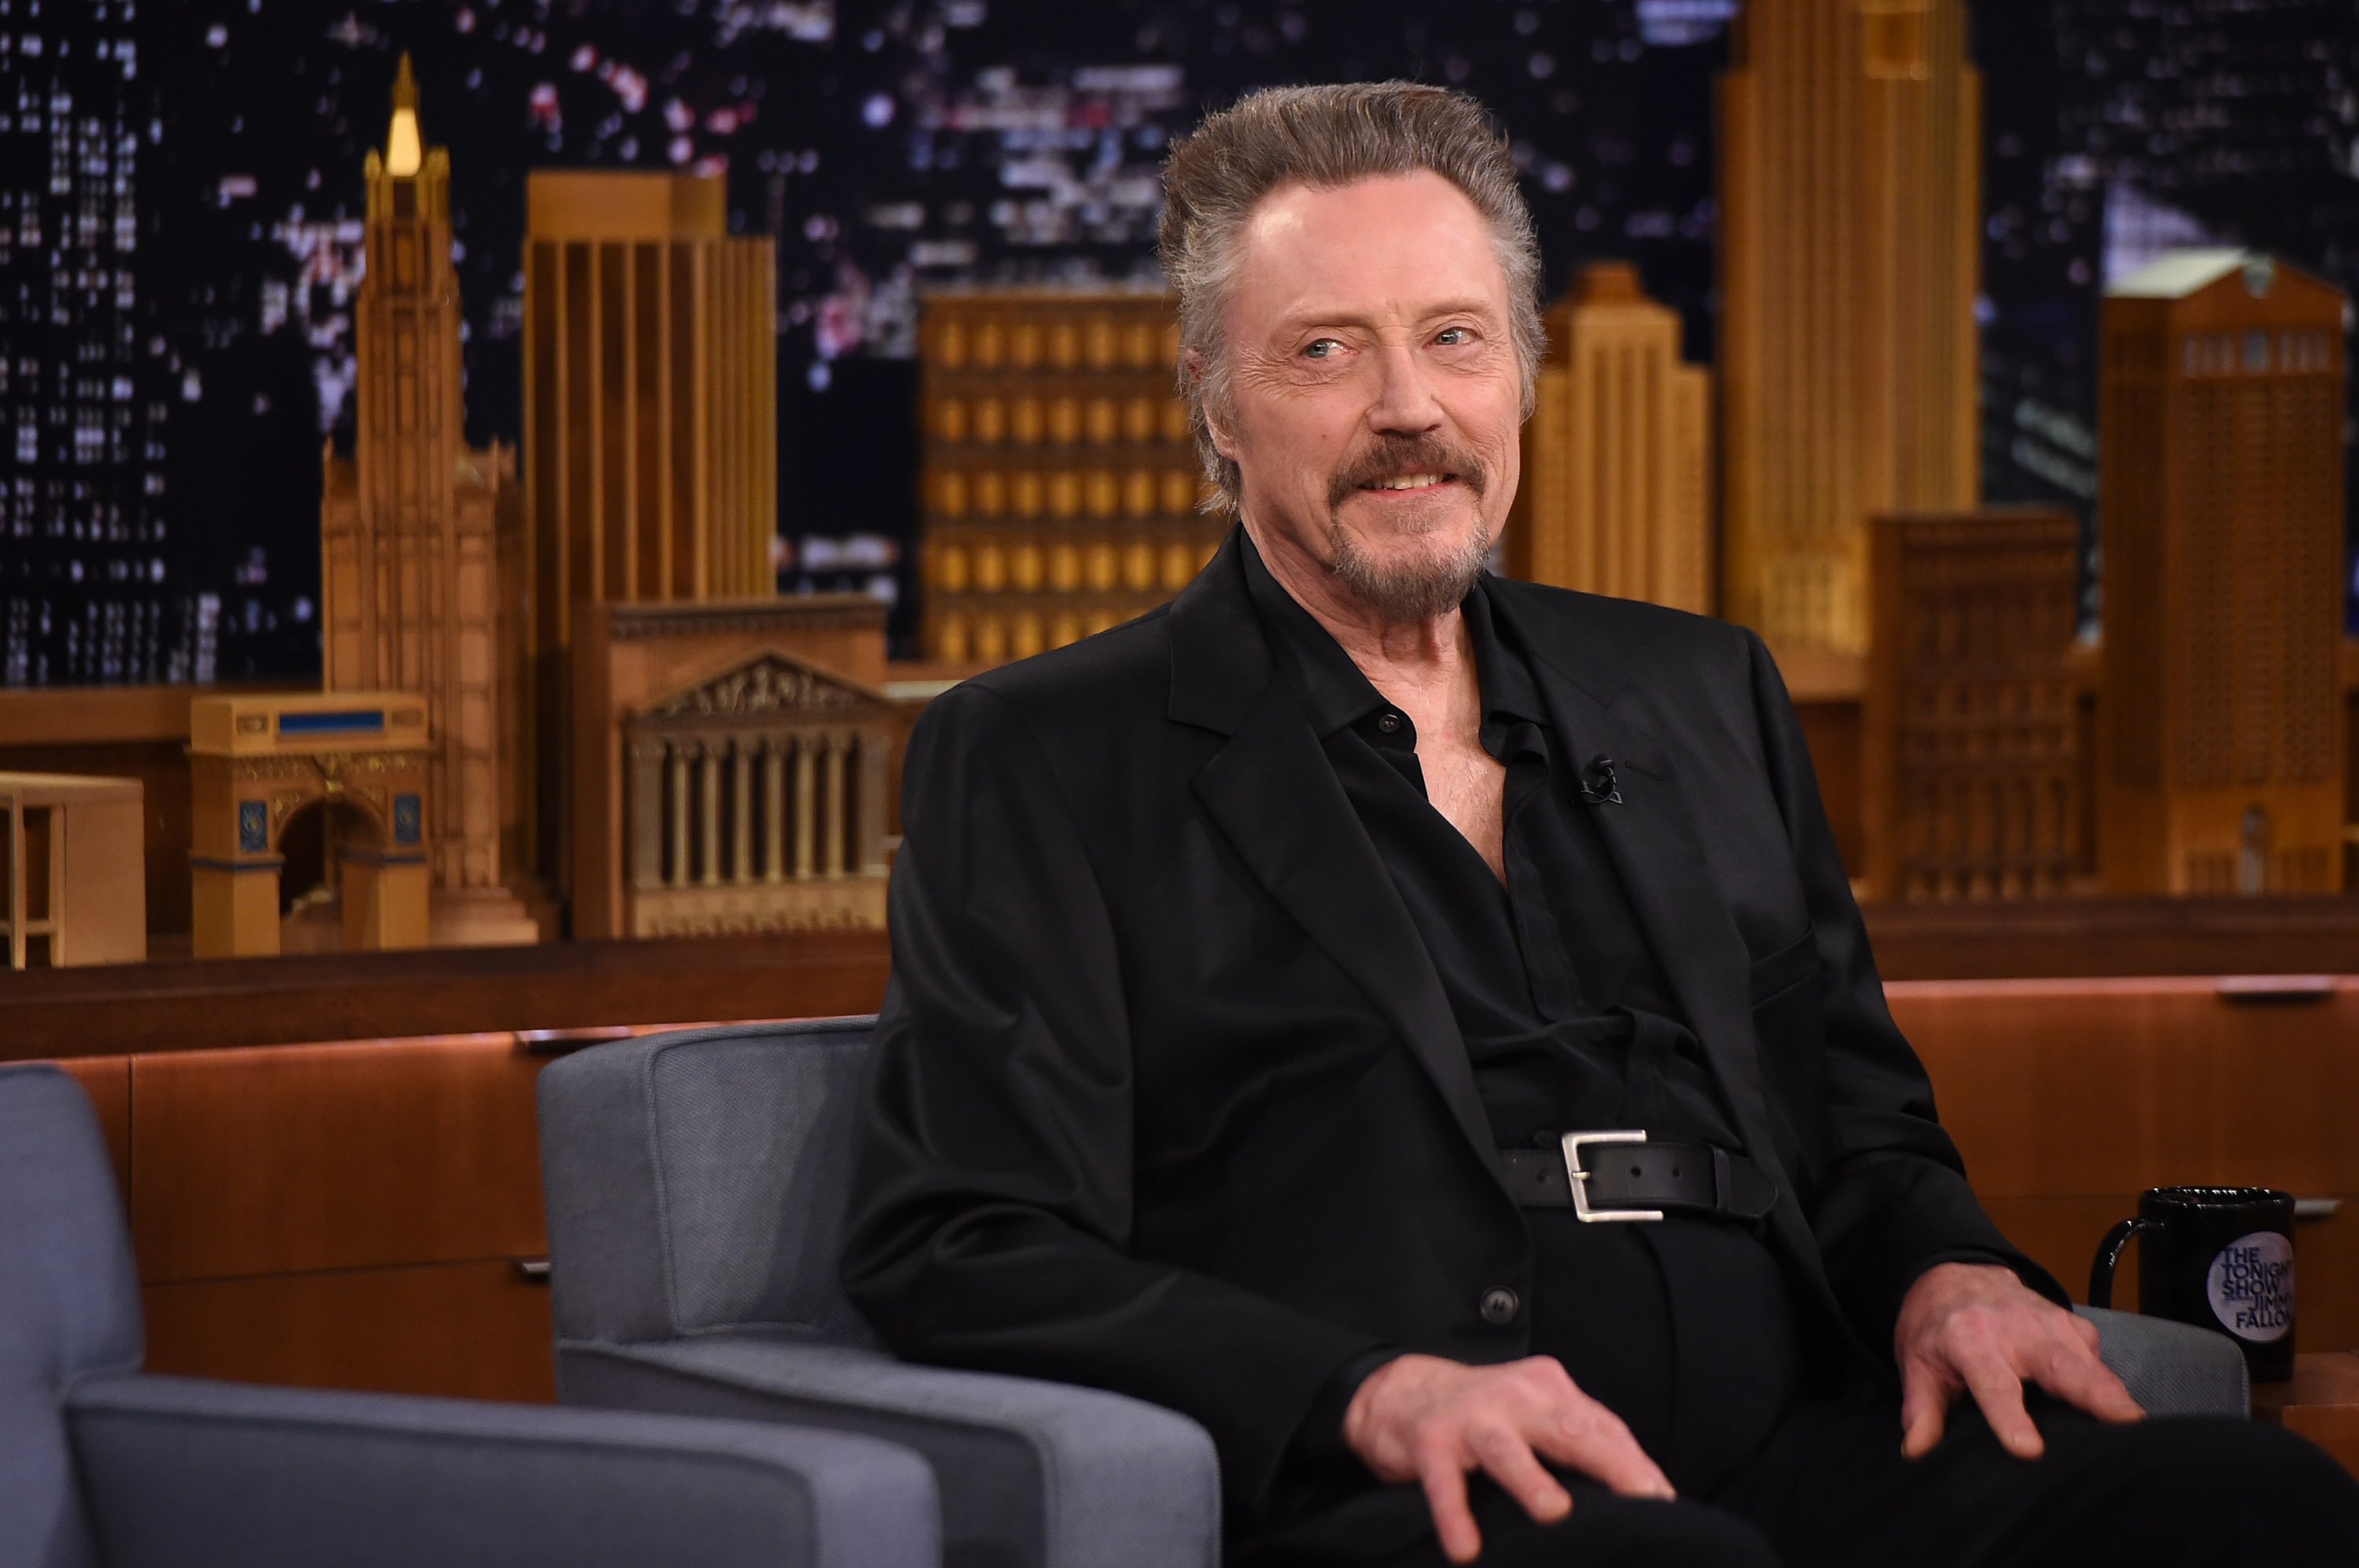 Christopher Walken Visits "The Tonight Show Starring Jimmy Fallon" at Rockefeller Center on November 26, 2014 in New York City. | Source: Getty Images